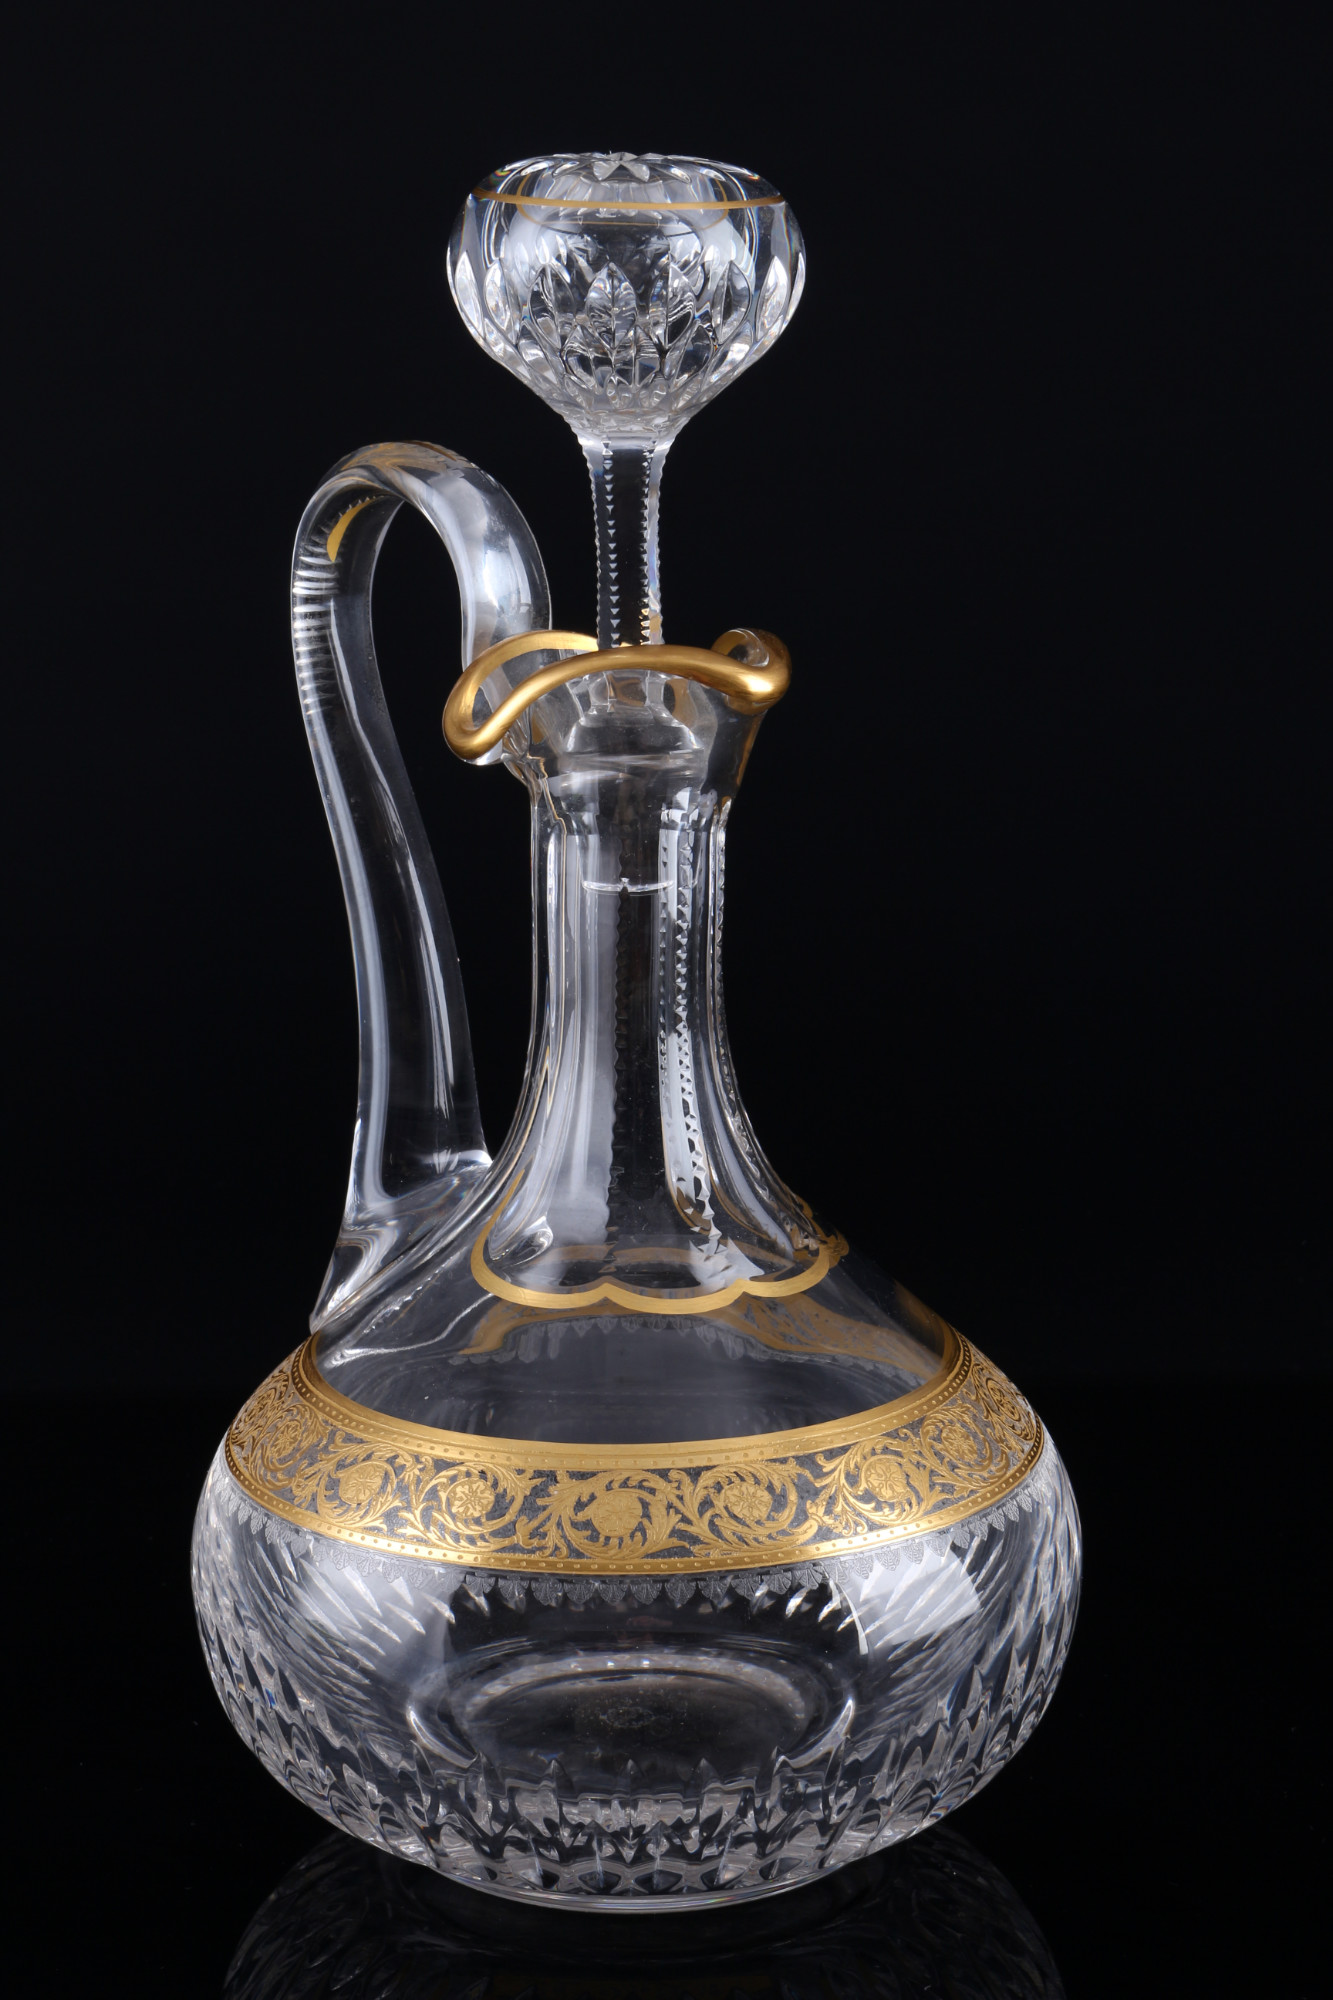 St. Louis Thistle Gold large wine decanter, großer Weindekanter, - Image 3 of 4